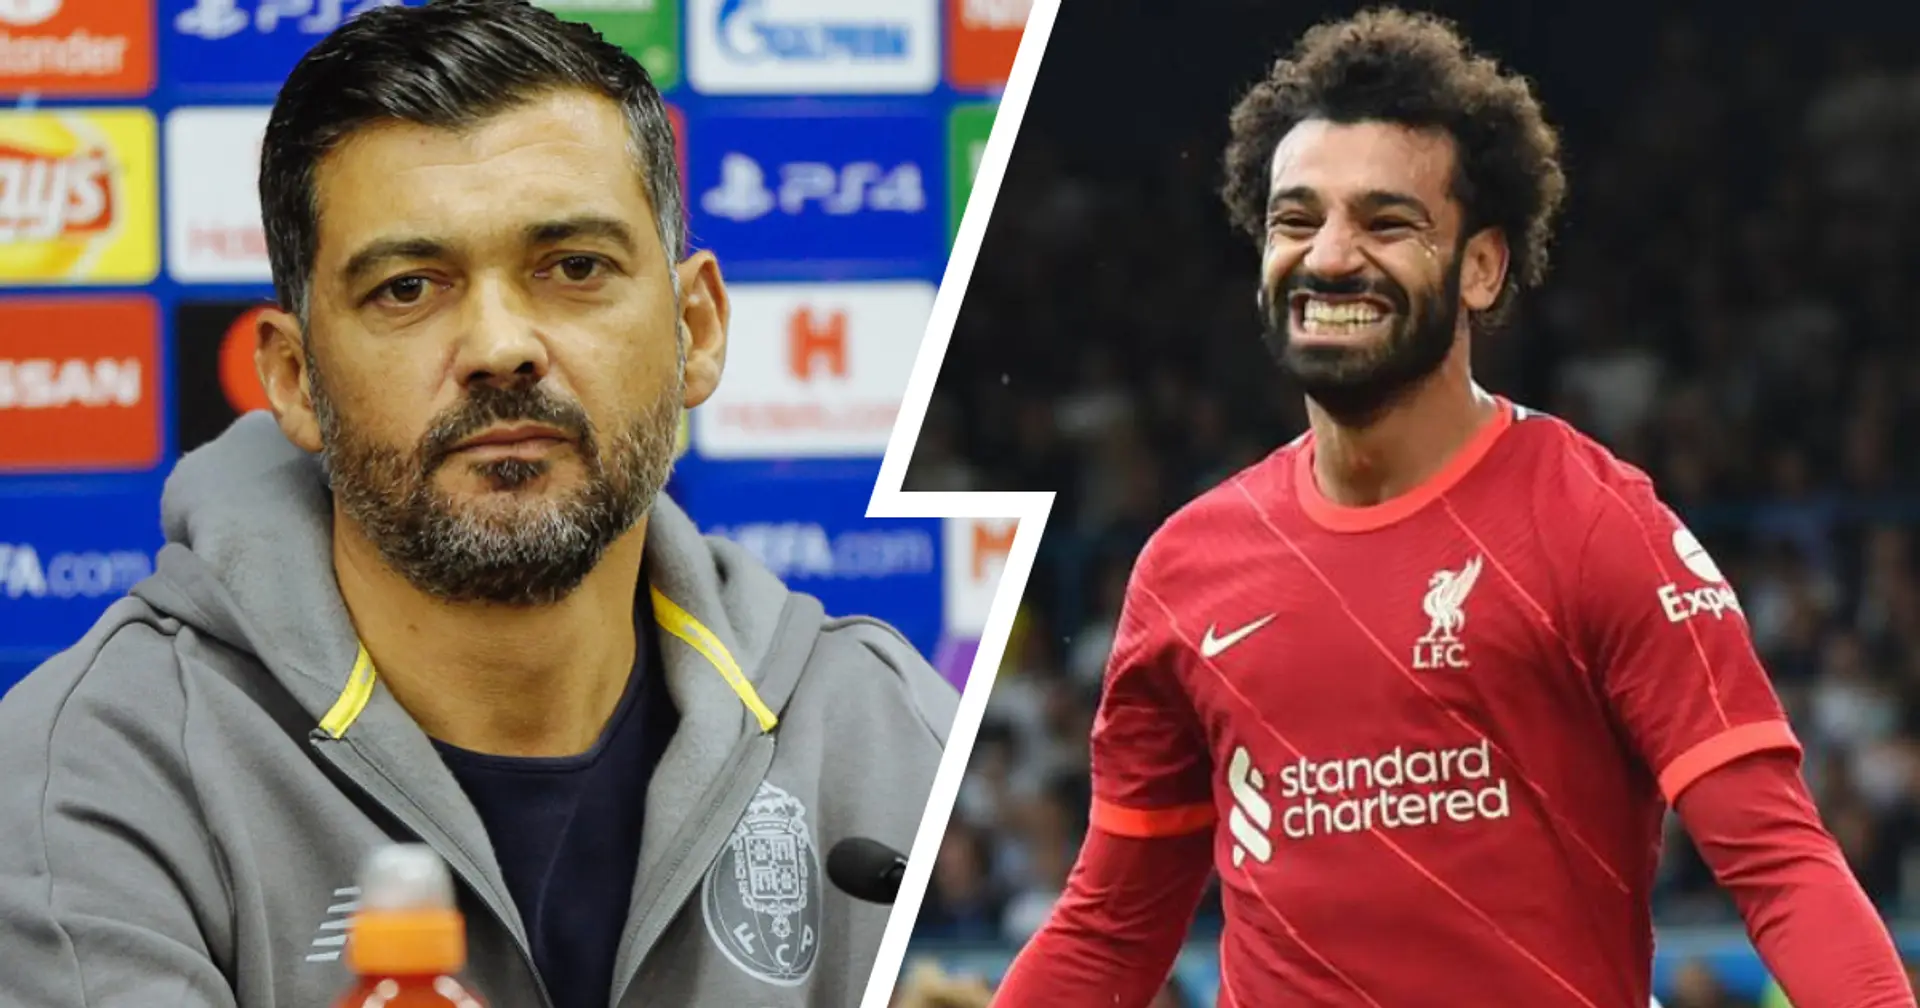 'We lost to individual quality': Porto manager singles out two LFC players as reason for Anfield defeat